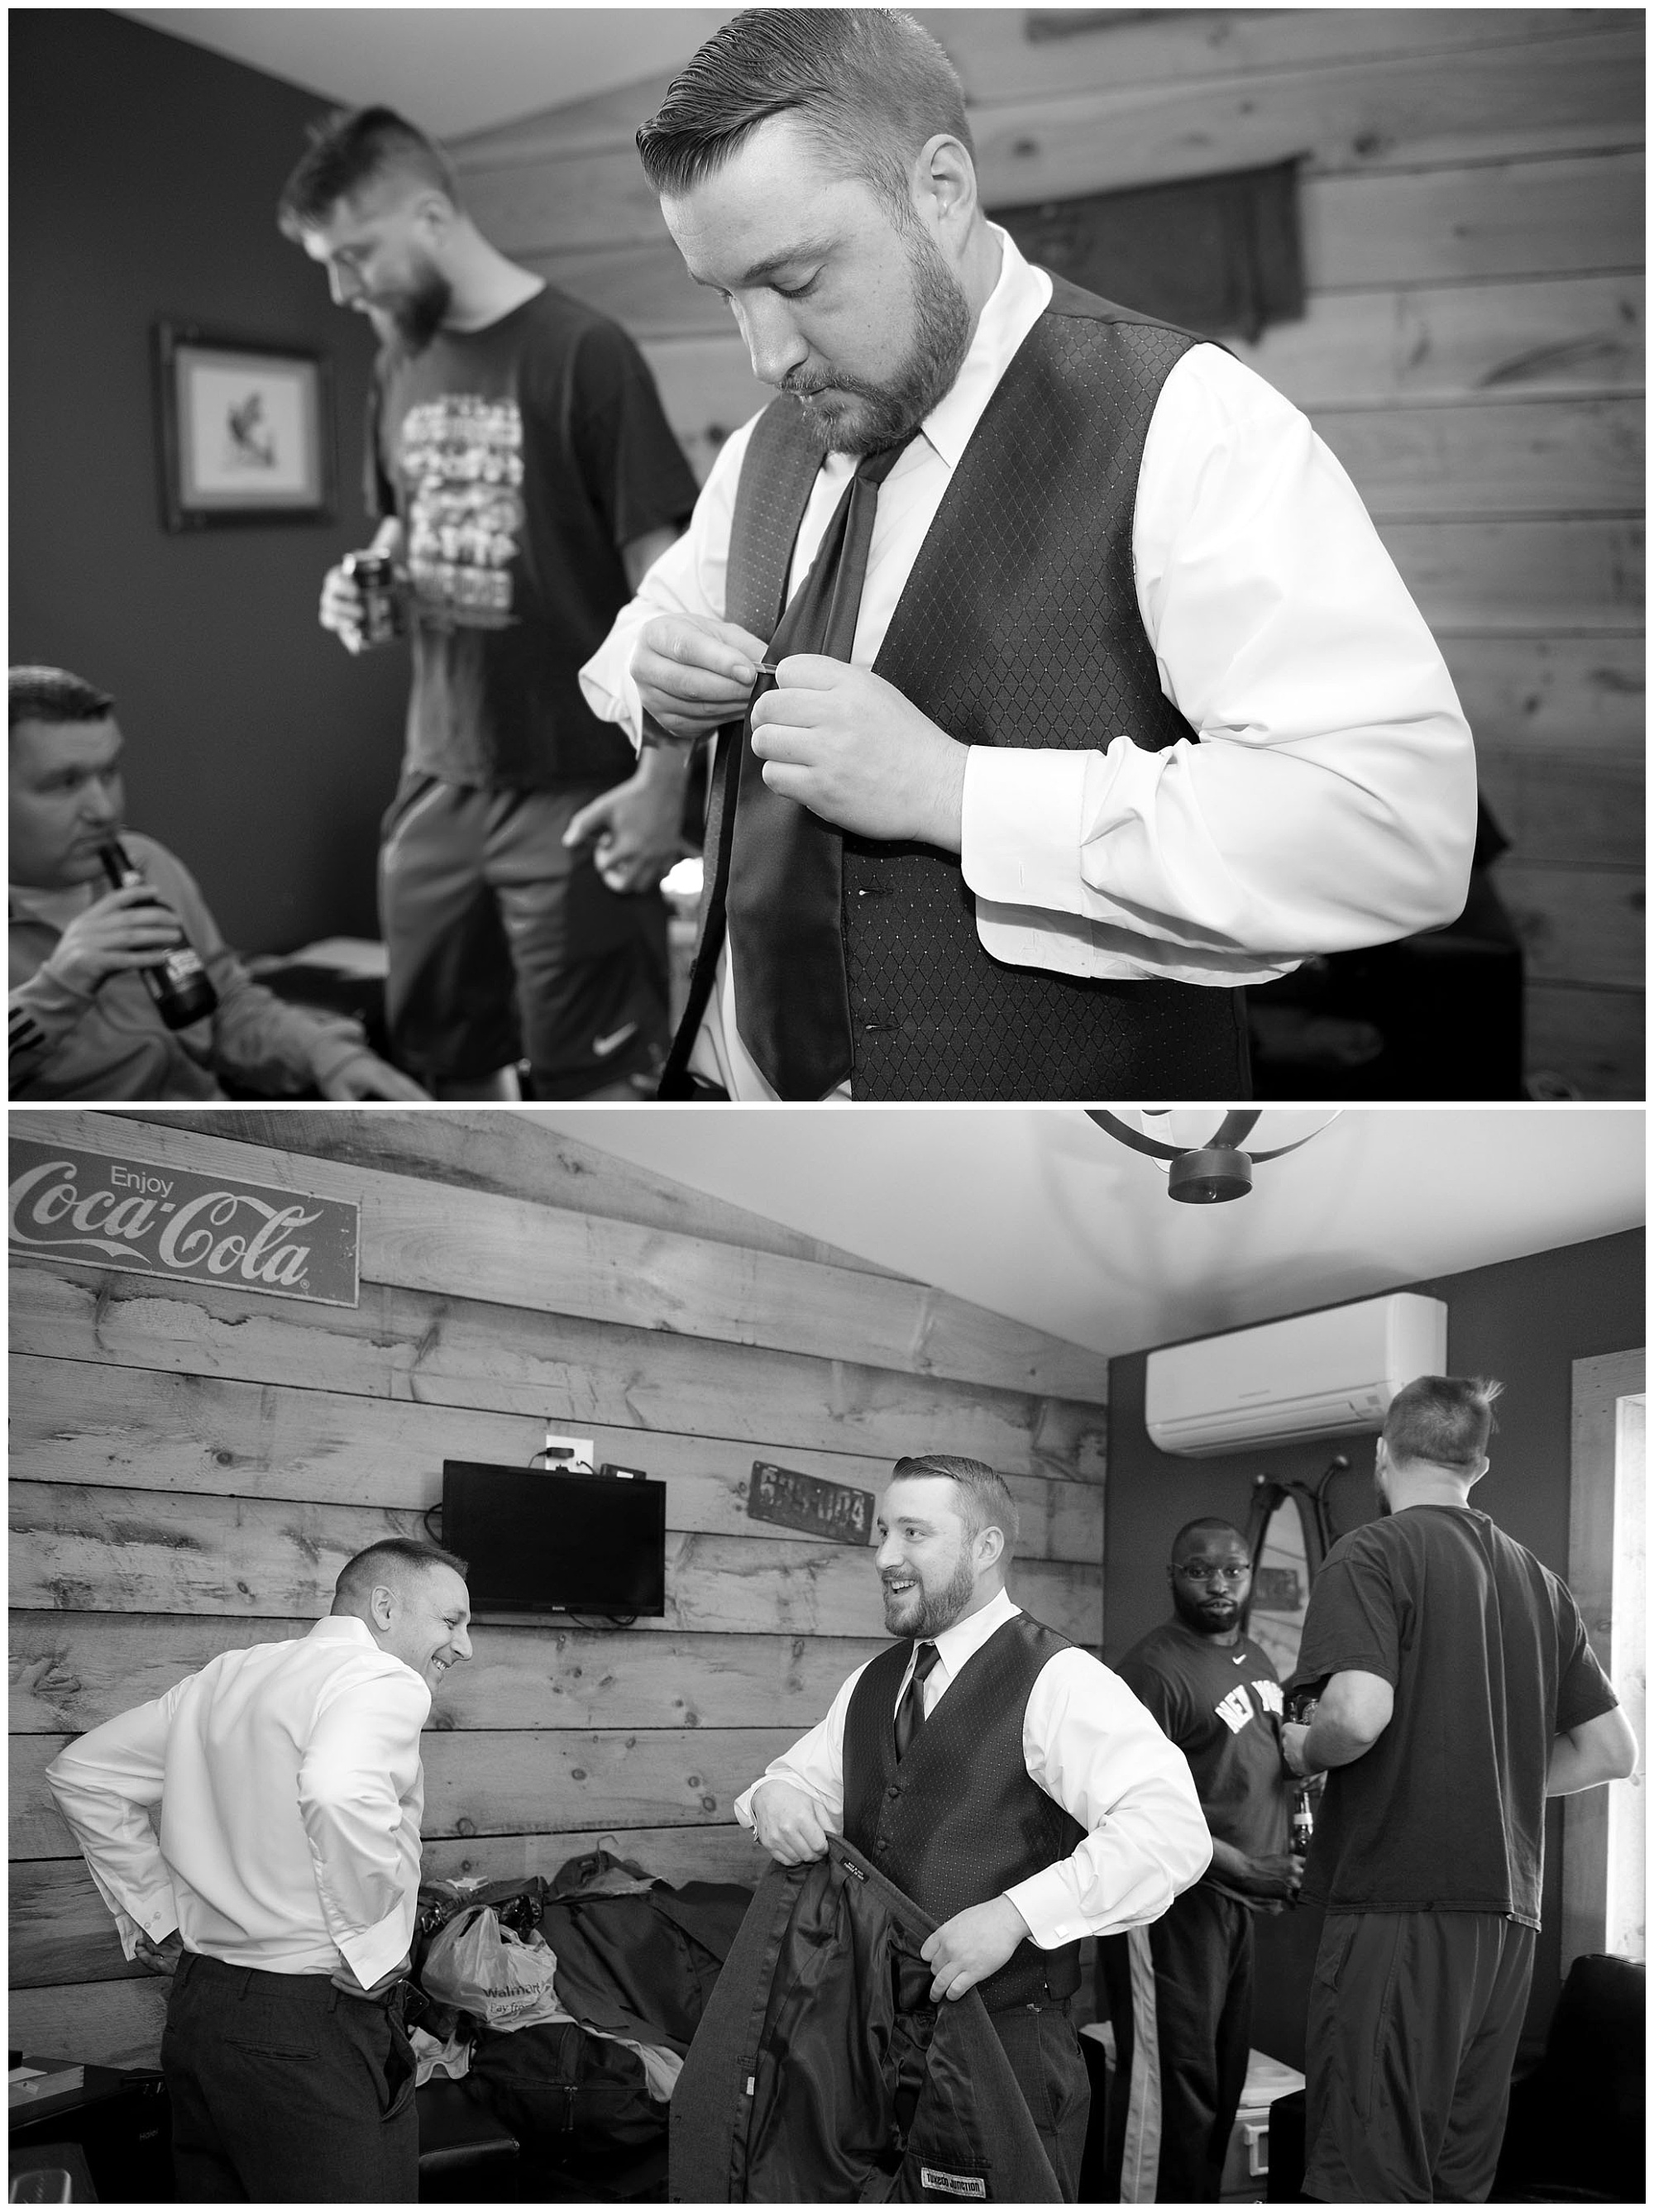 Two photos of a groom with his groomsmen getting ready and putting on his tie.